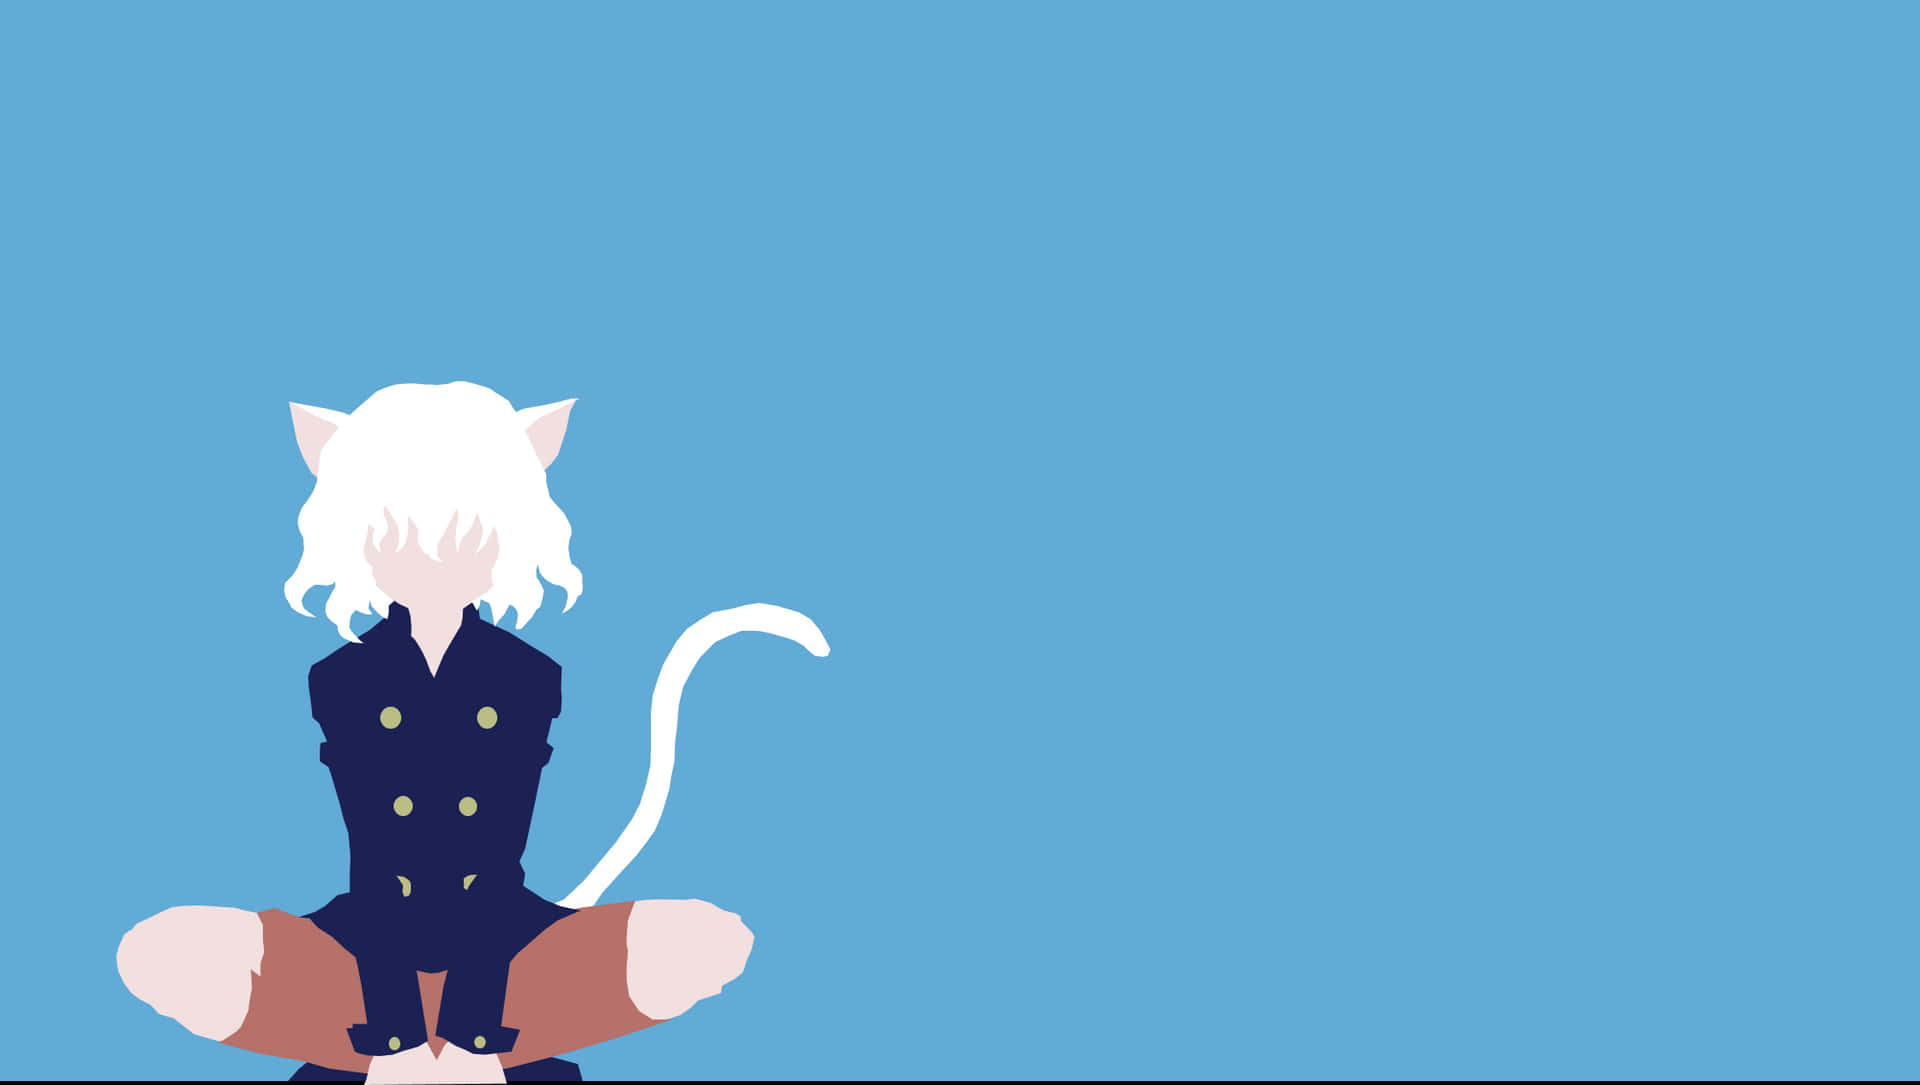 Neferpitou from Hunter x Hunter ready to take on the world! Wallpaper